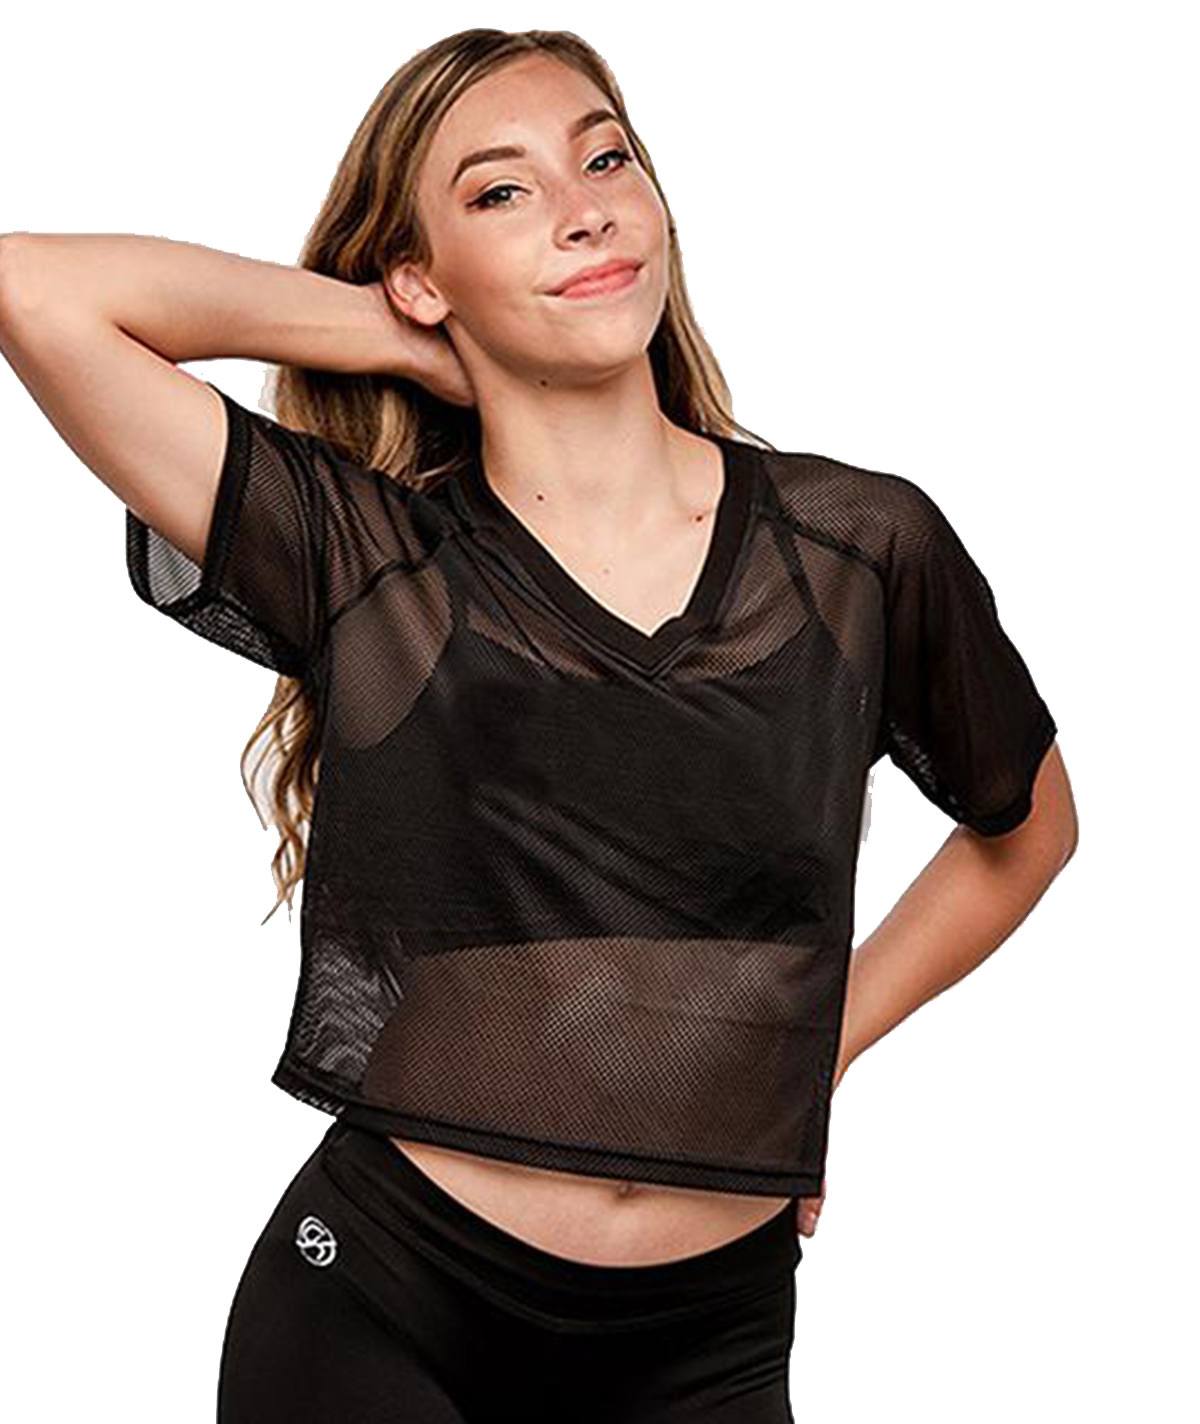 GK All Star Streetwear Cropped Out! Mesh Jersey